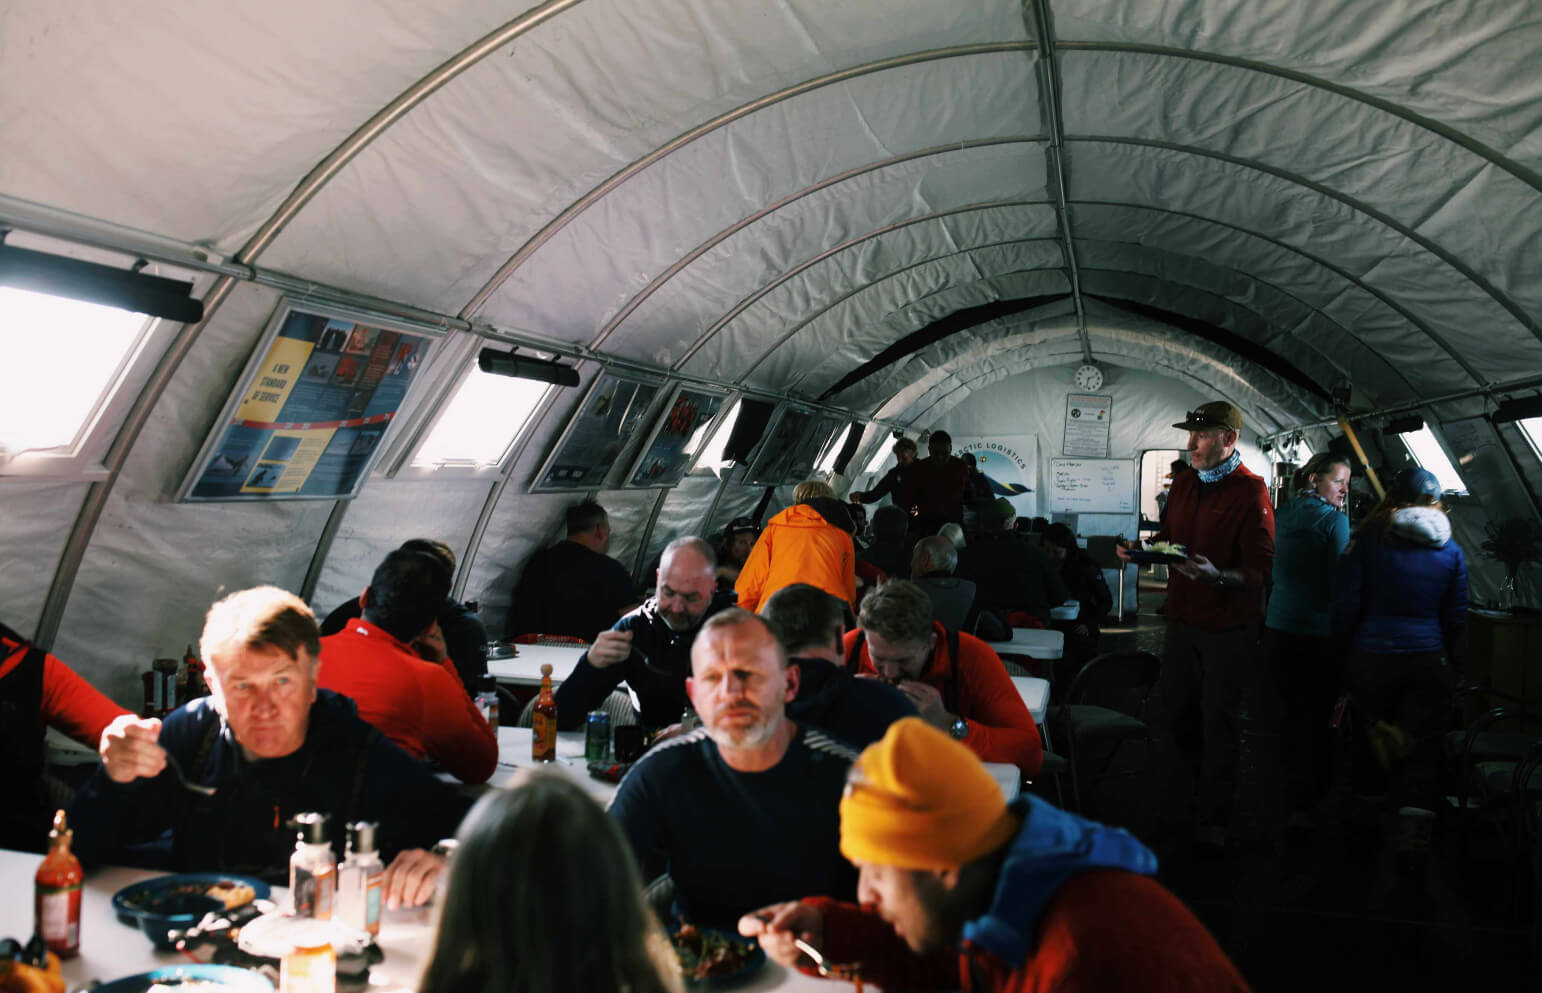 Canteen at the Union Glacier Camp.